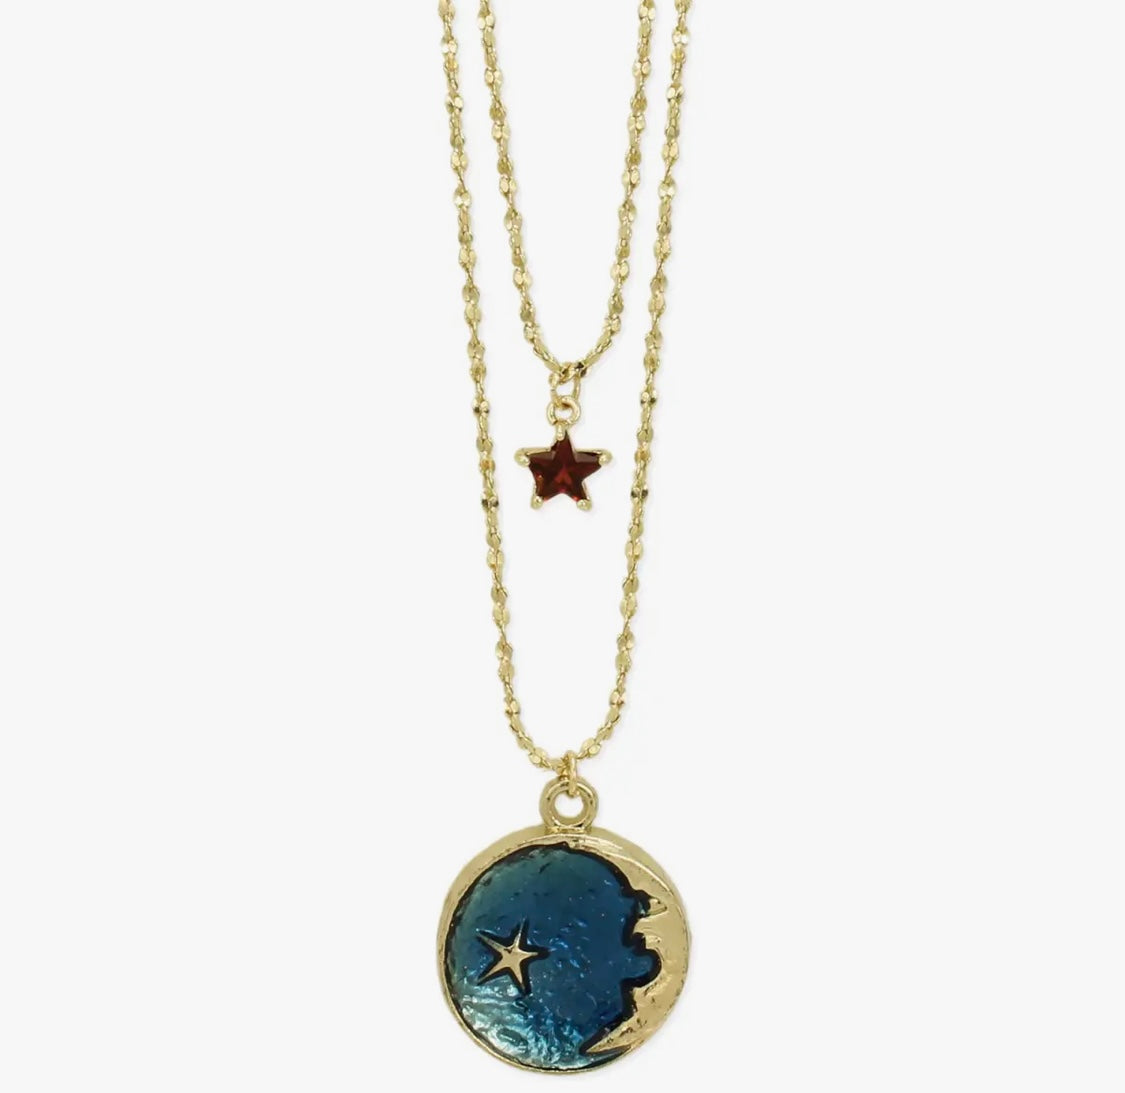 Colorful Night Moon Star Layer Necklace